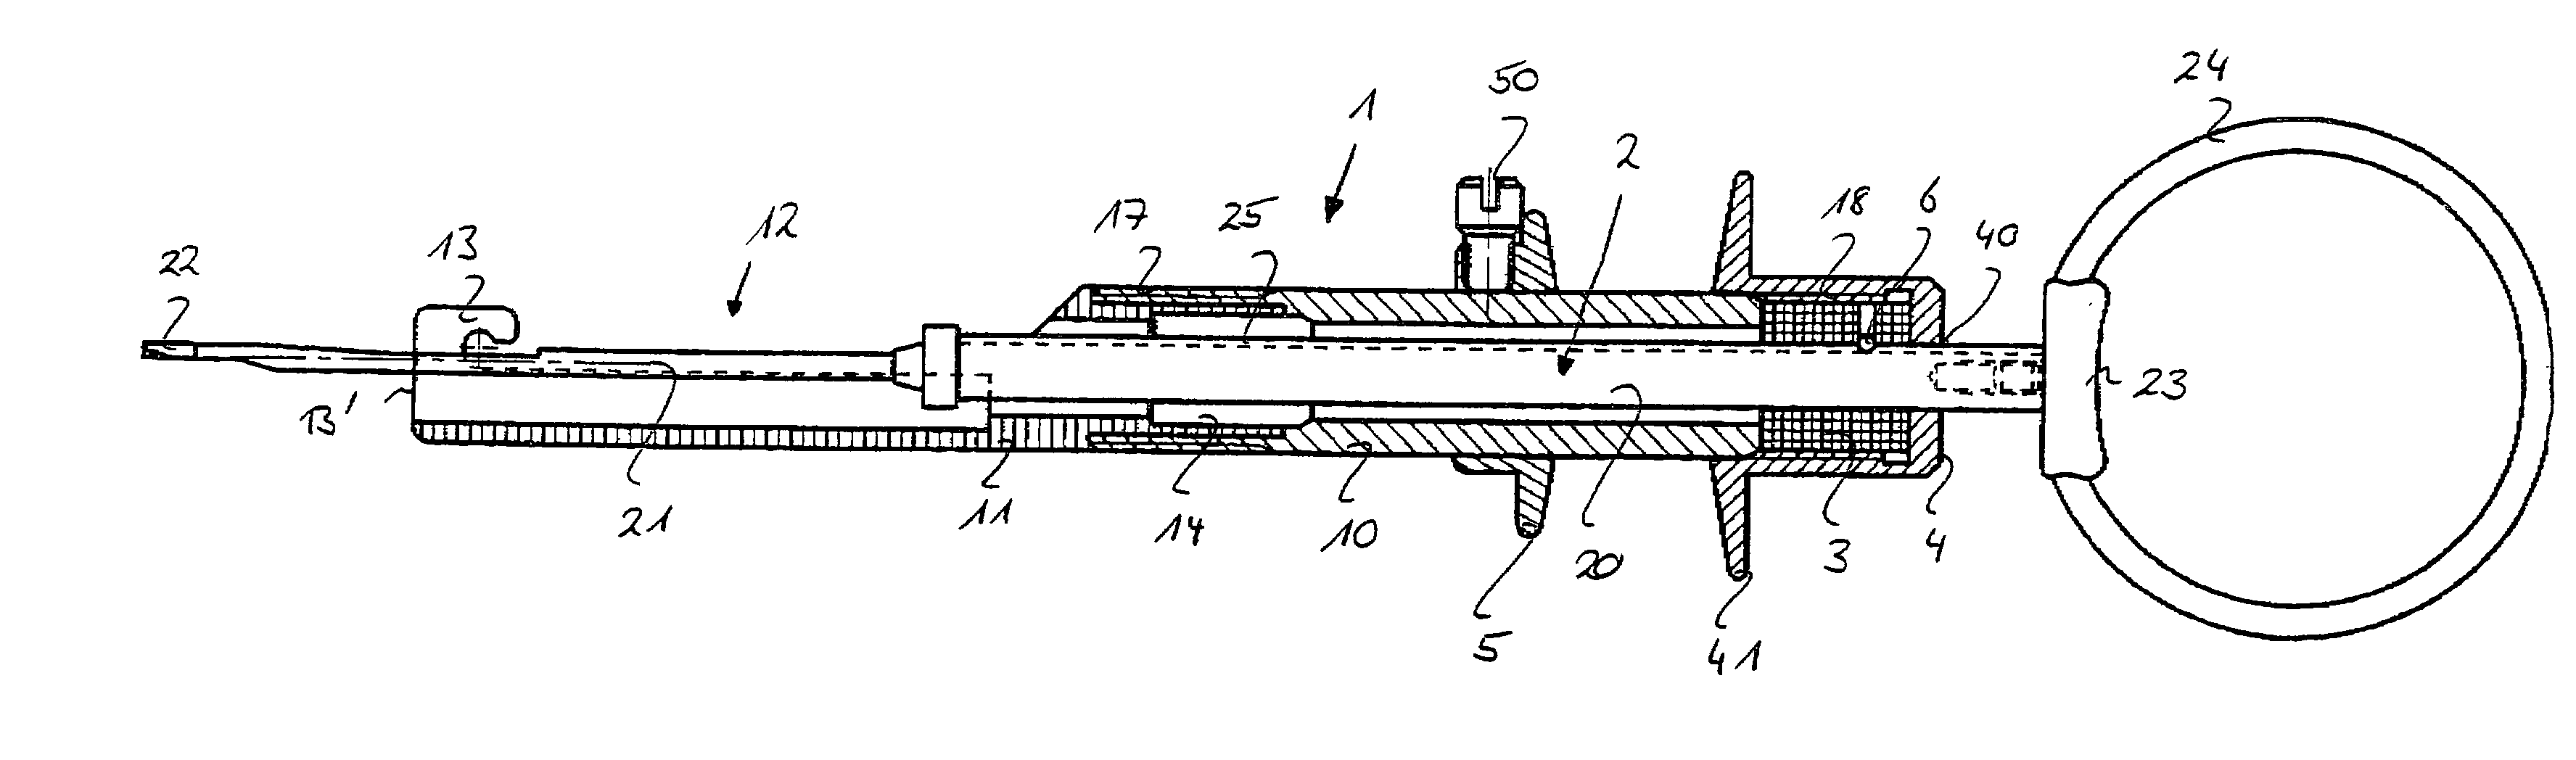 Device for inserting a lens into an eye